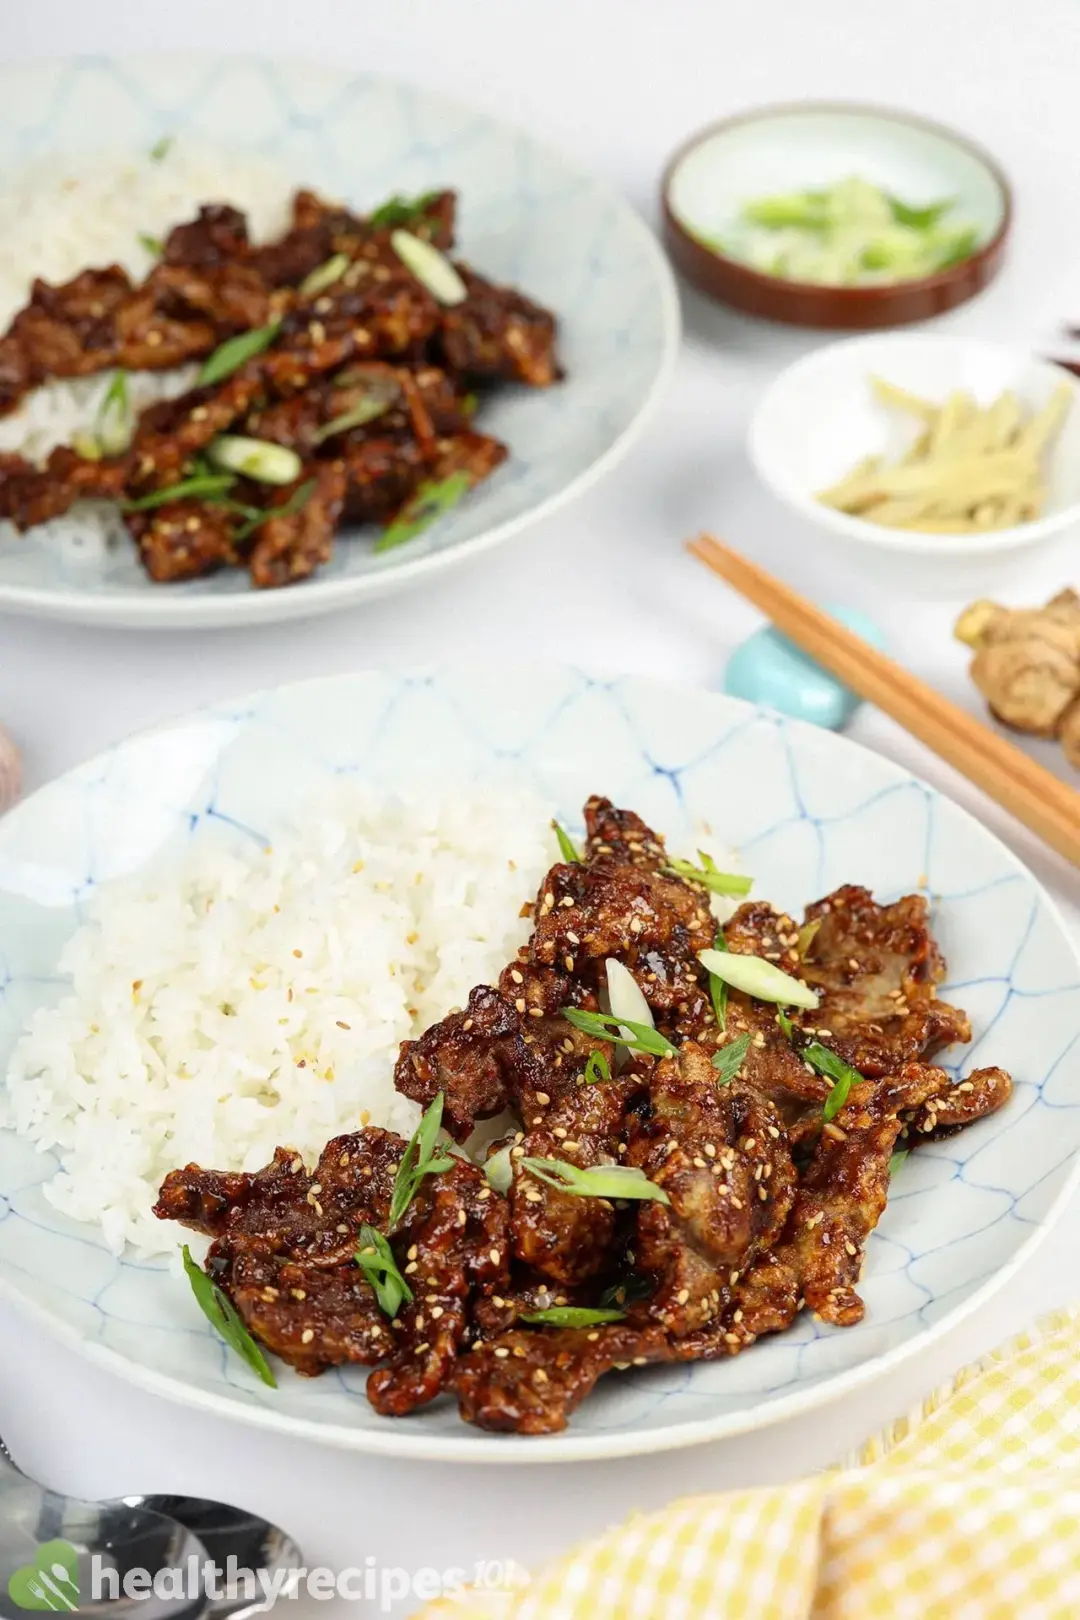 What Kind of Beef Is Best for Ginger Beef